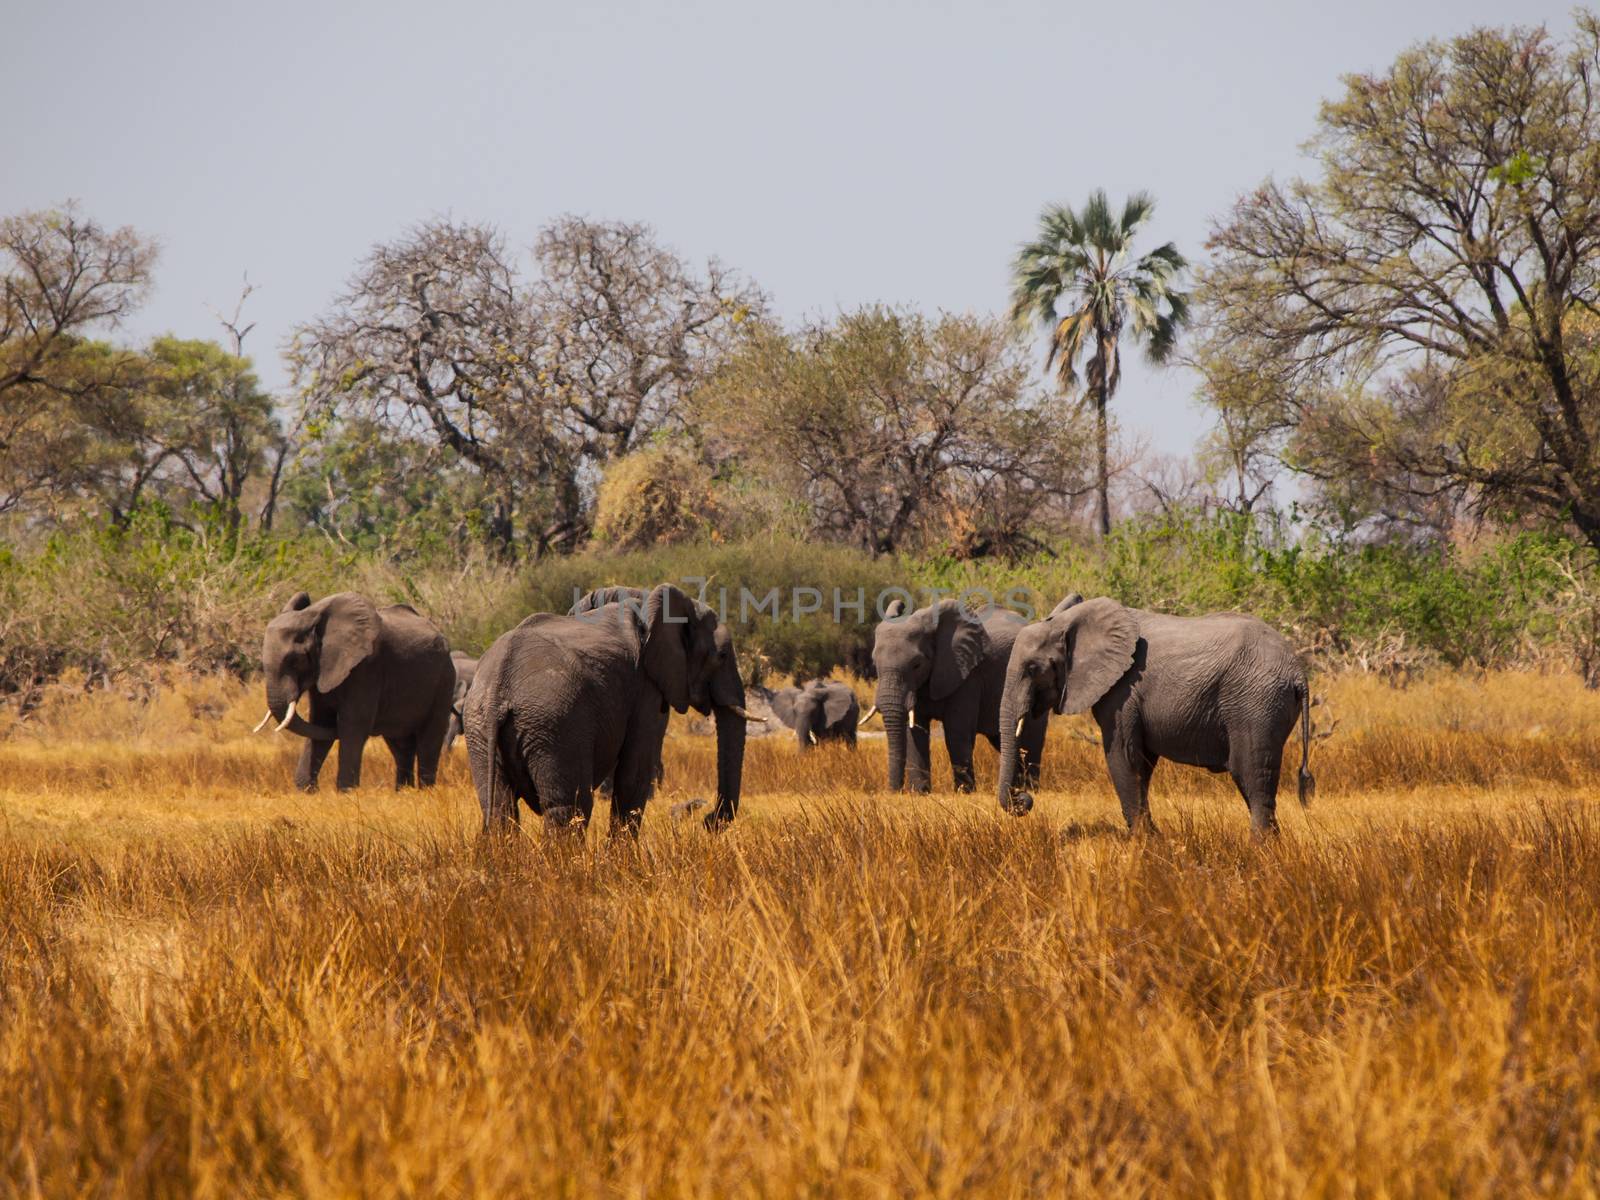 Elephant herd by pyty